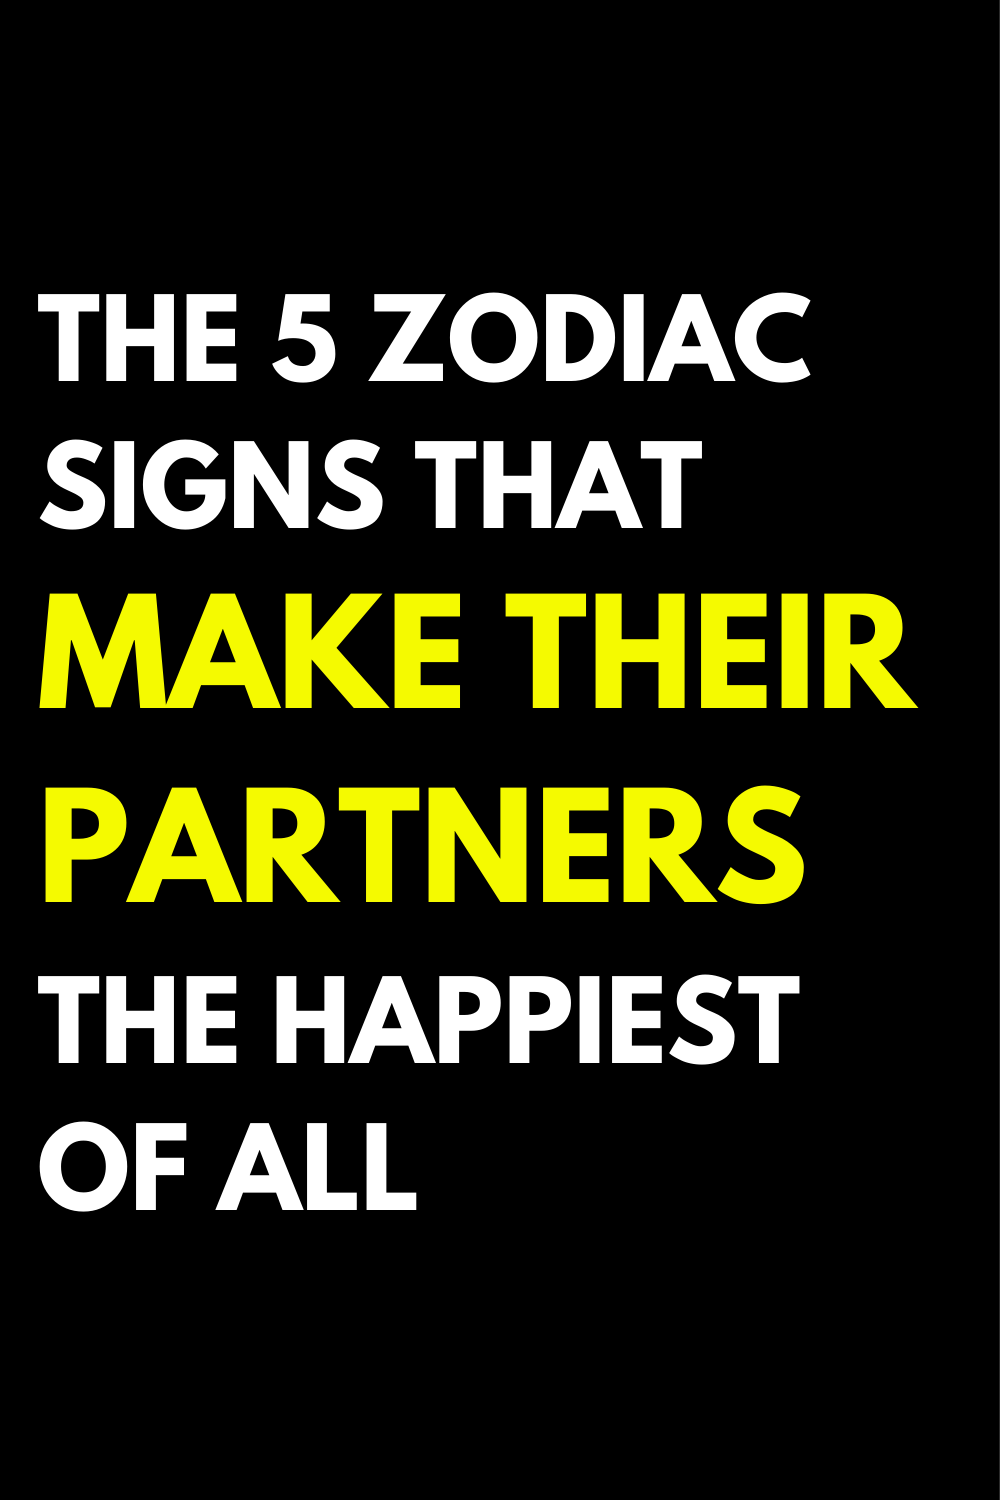 The 5 Zodiac Signs That Make Their Partners The Happiest Of All